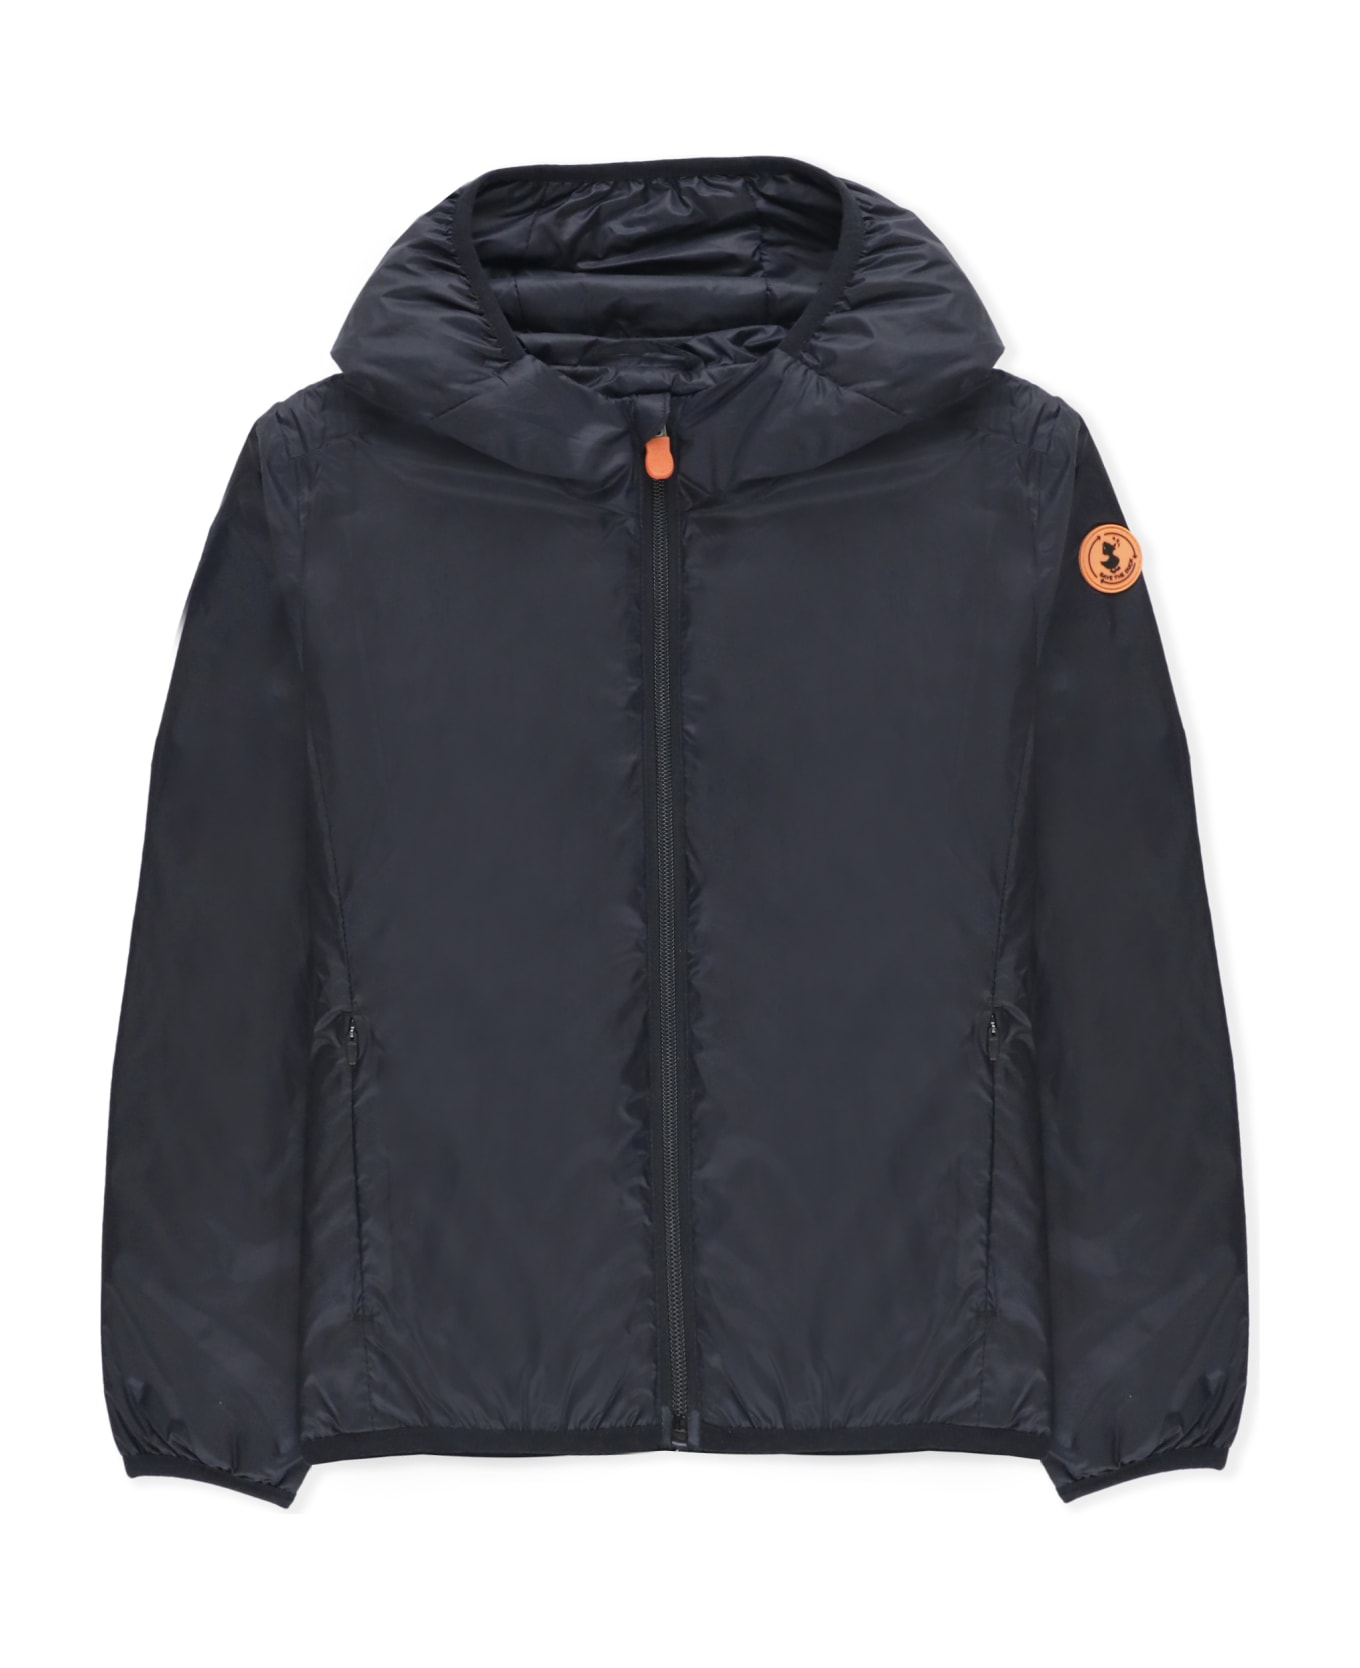 Save the Duck Shilo Padded Jacket - Black